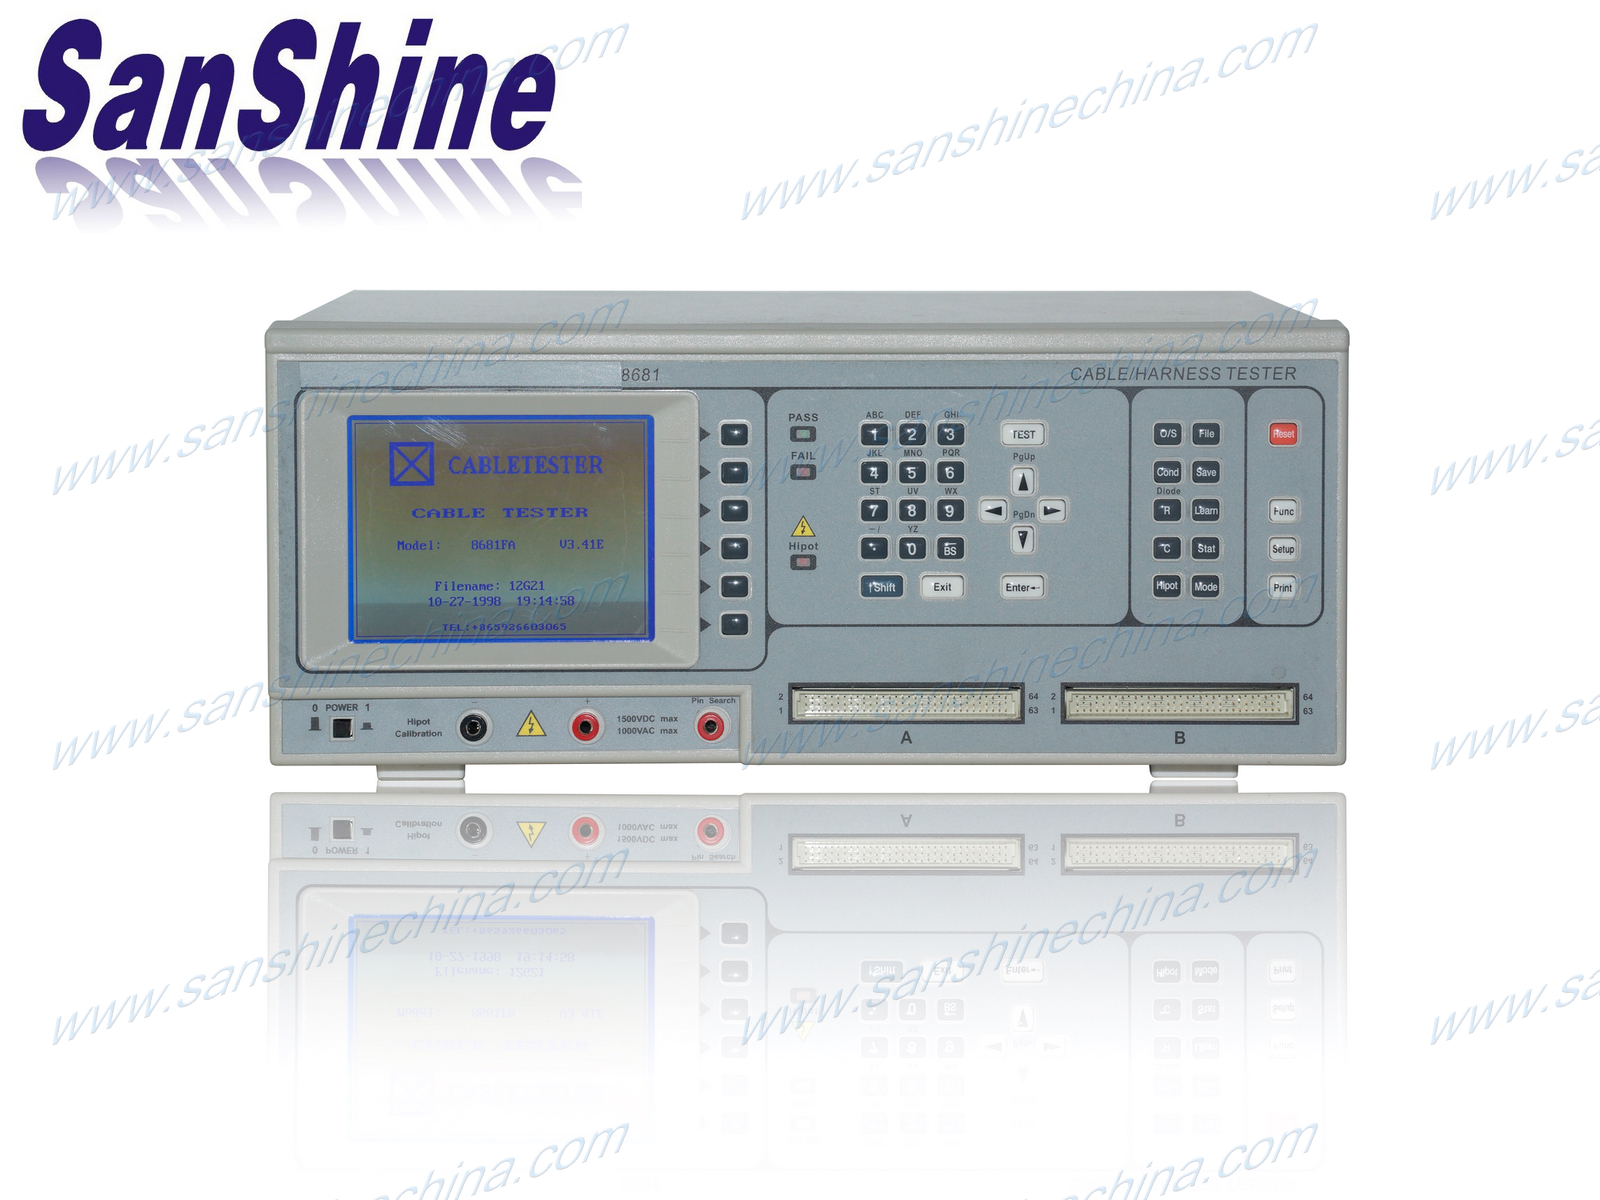 Cable tester (SS8681 series)